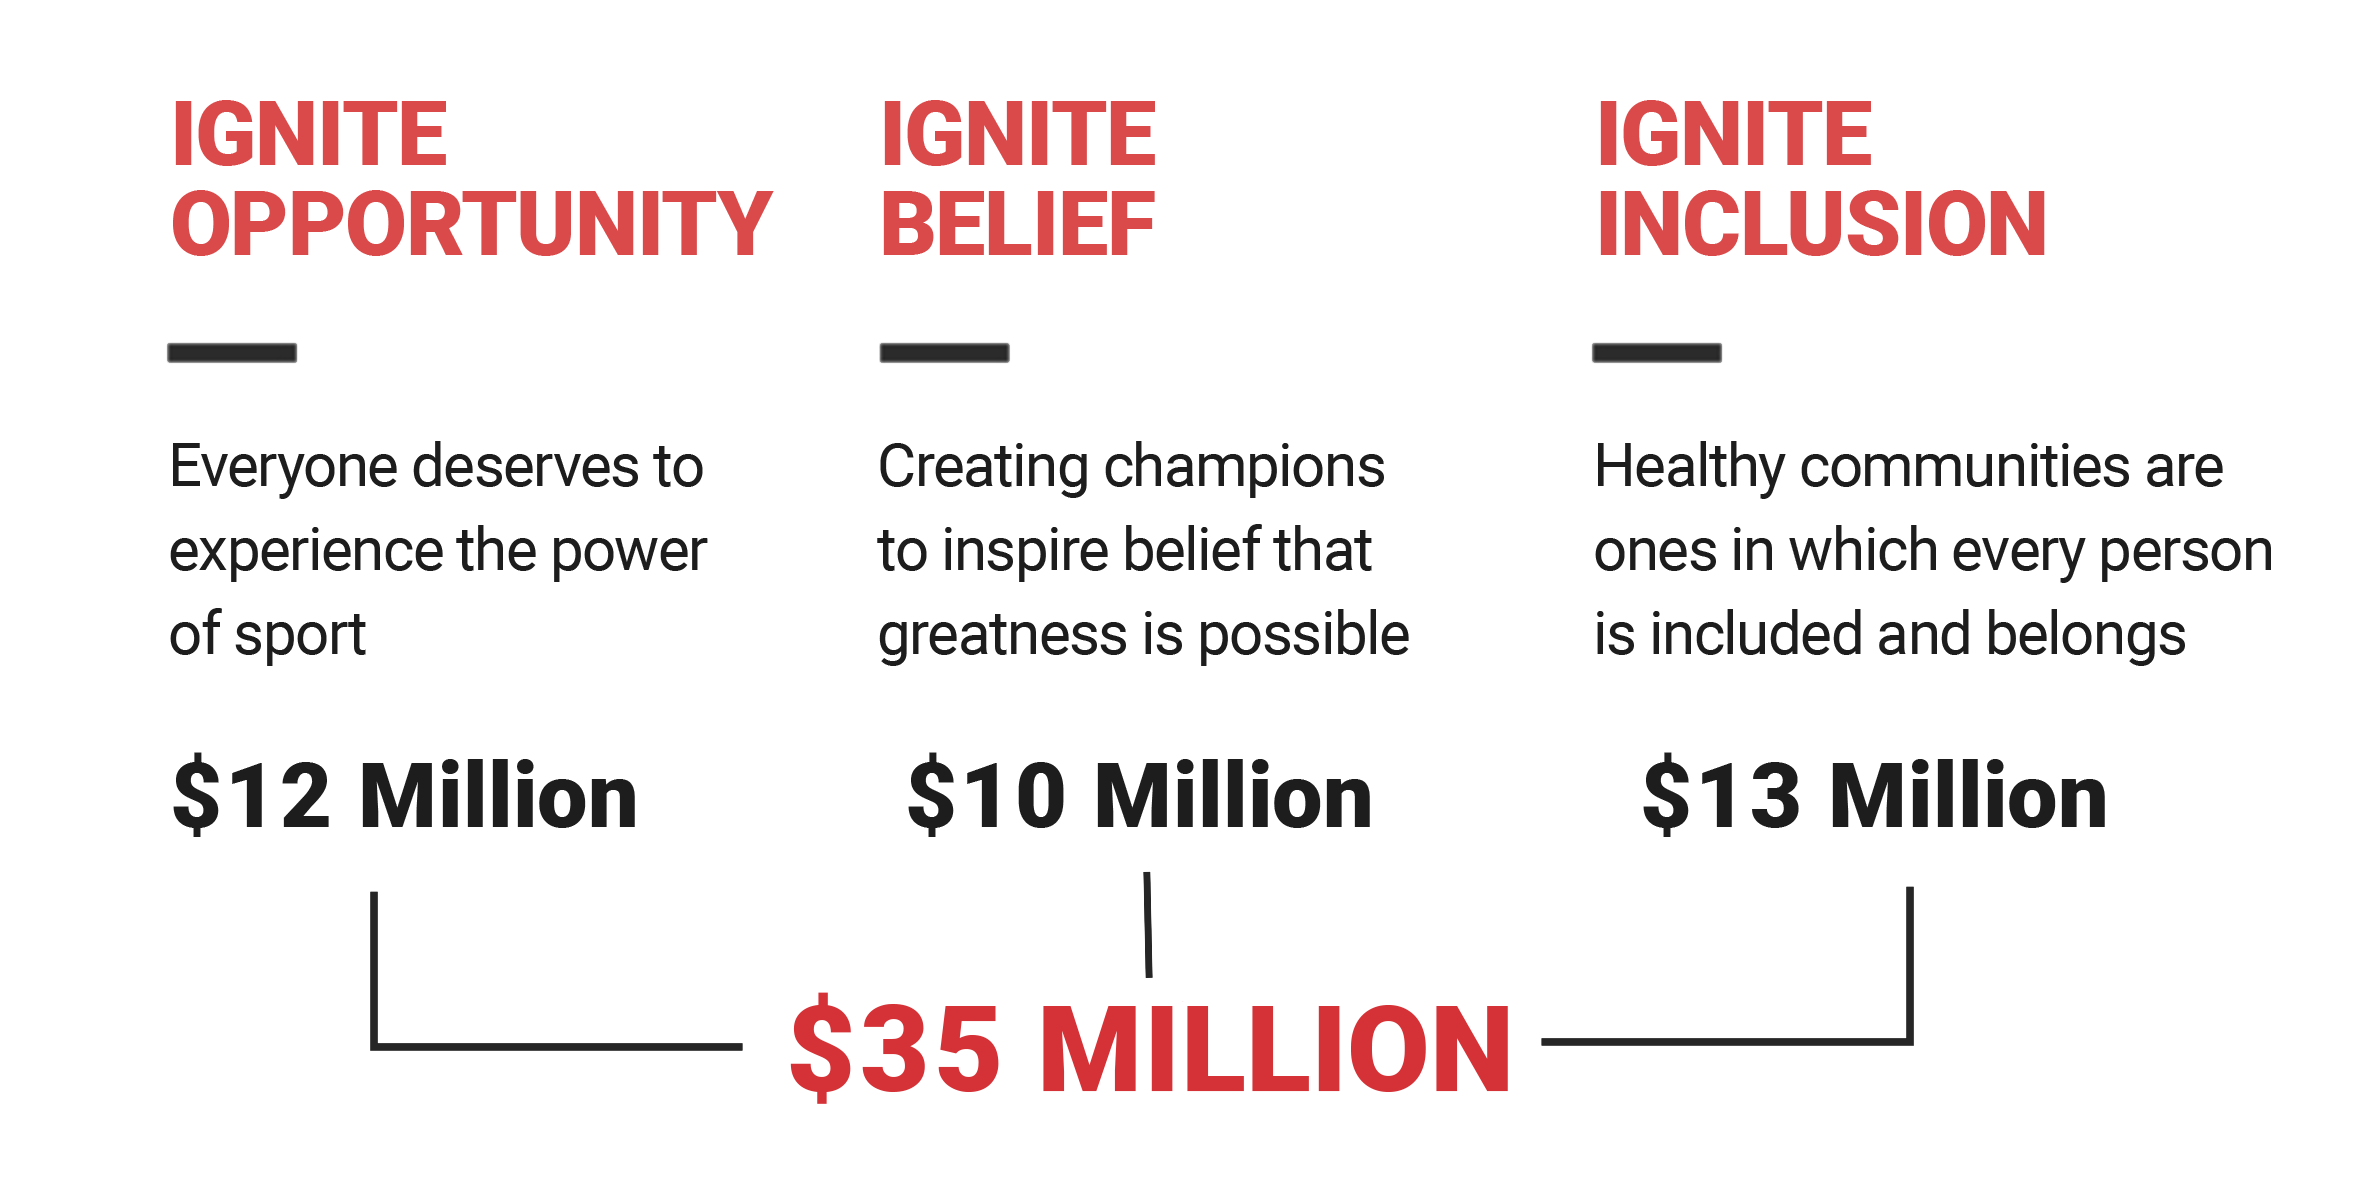 IGNITE Opportunity - Everyone deserves to experience the power of sport - $12 Million | IGNITE Belief - Creating champions to inspire belief that greatness is possible - $10 million | IGNITE Inclusion - Healthy communities are ones in which every person is included and belongs - $13 million